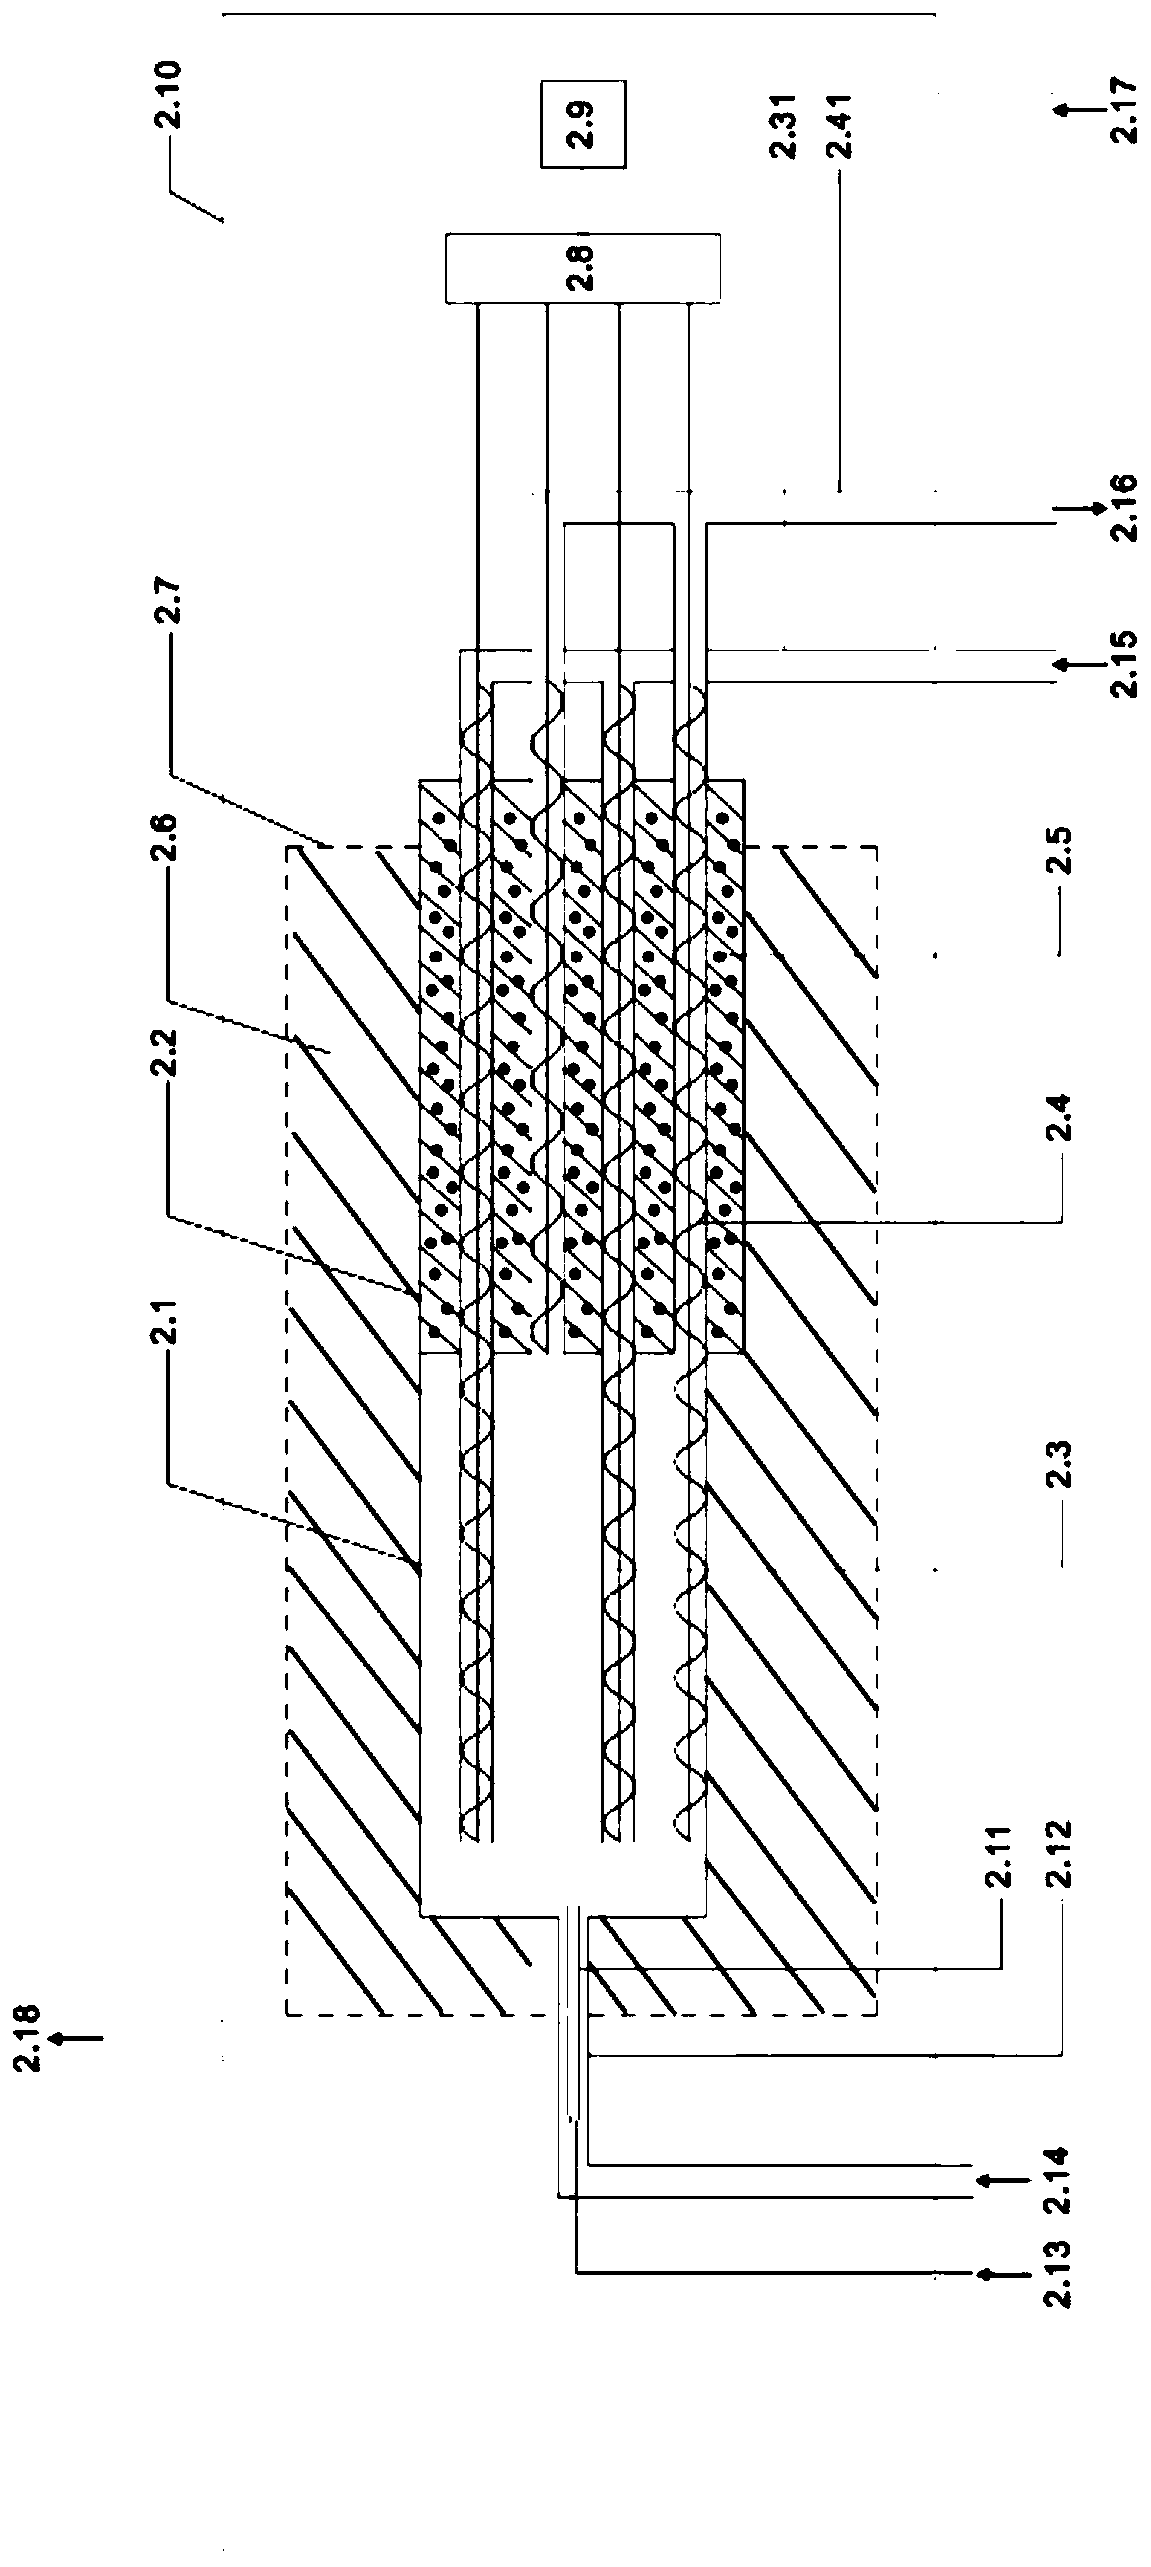 Ultra-critical gasification device and method